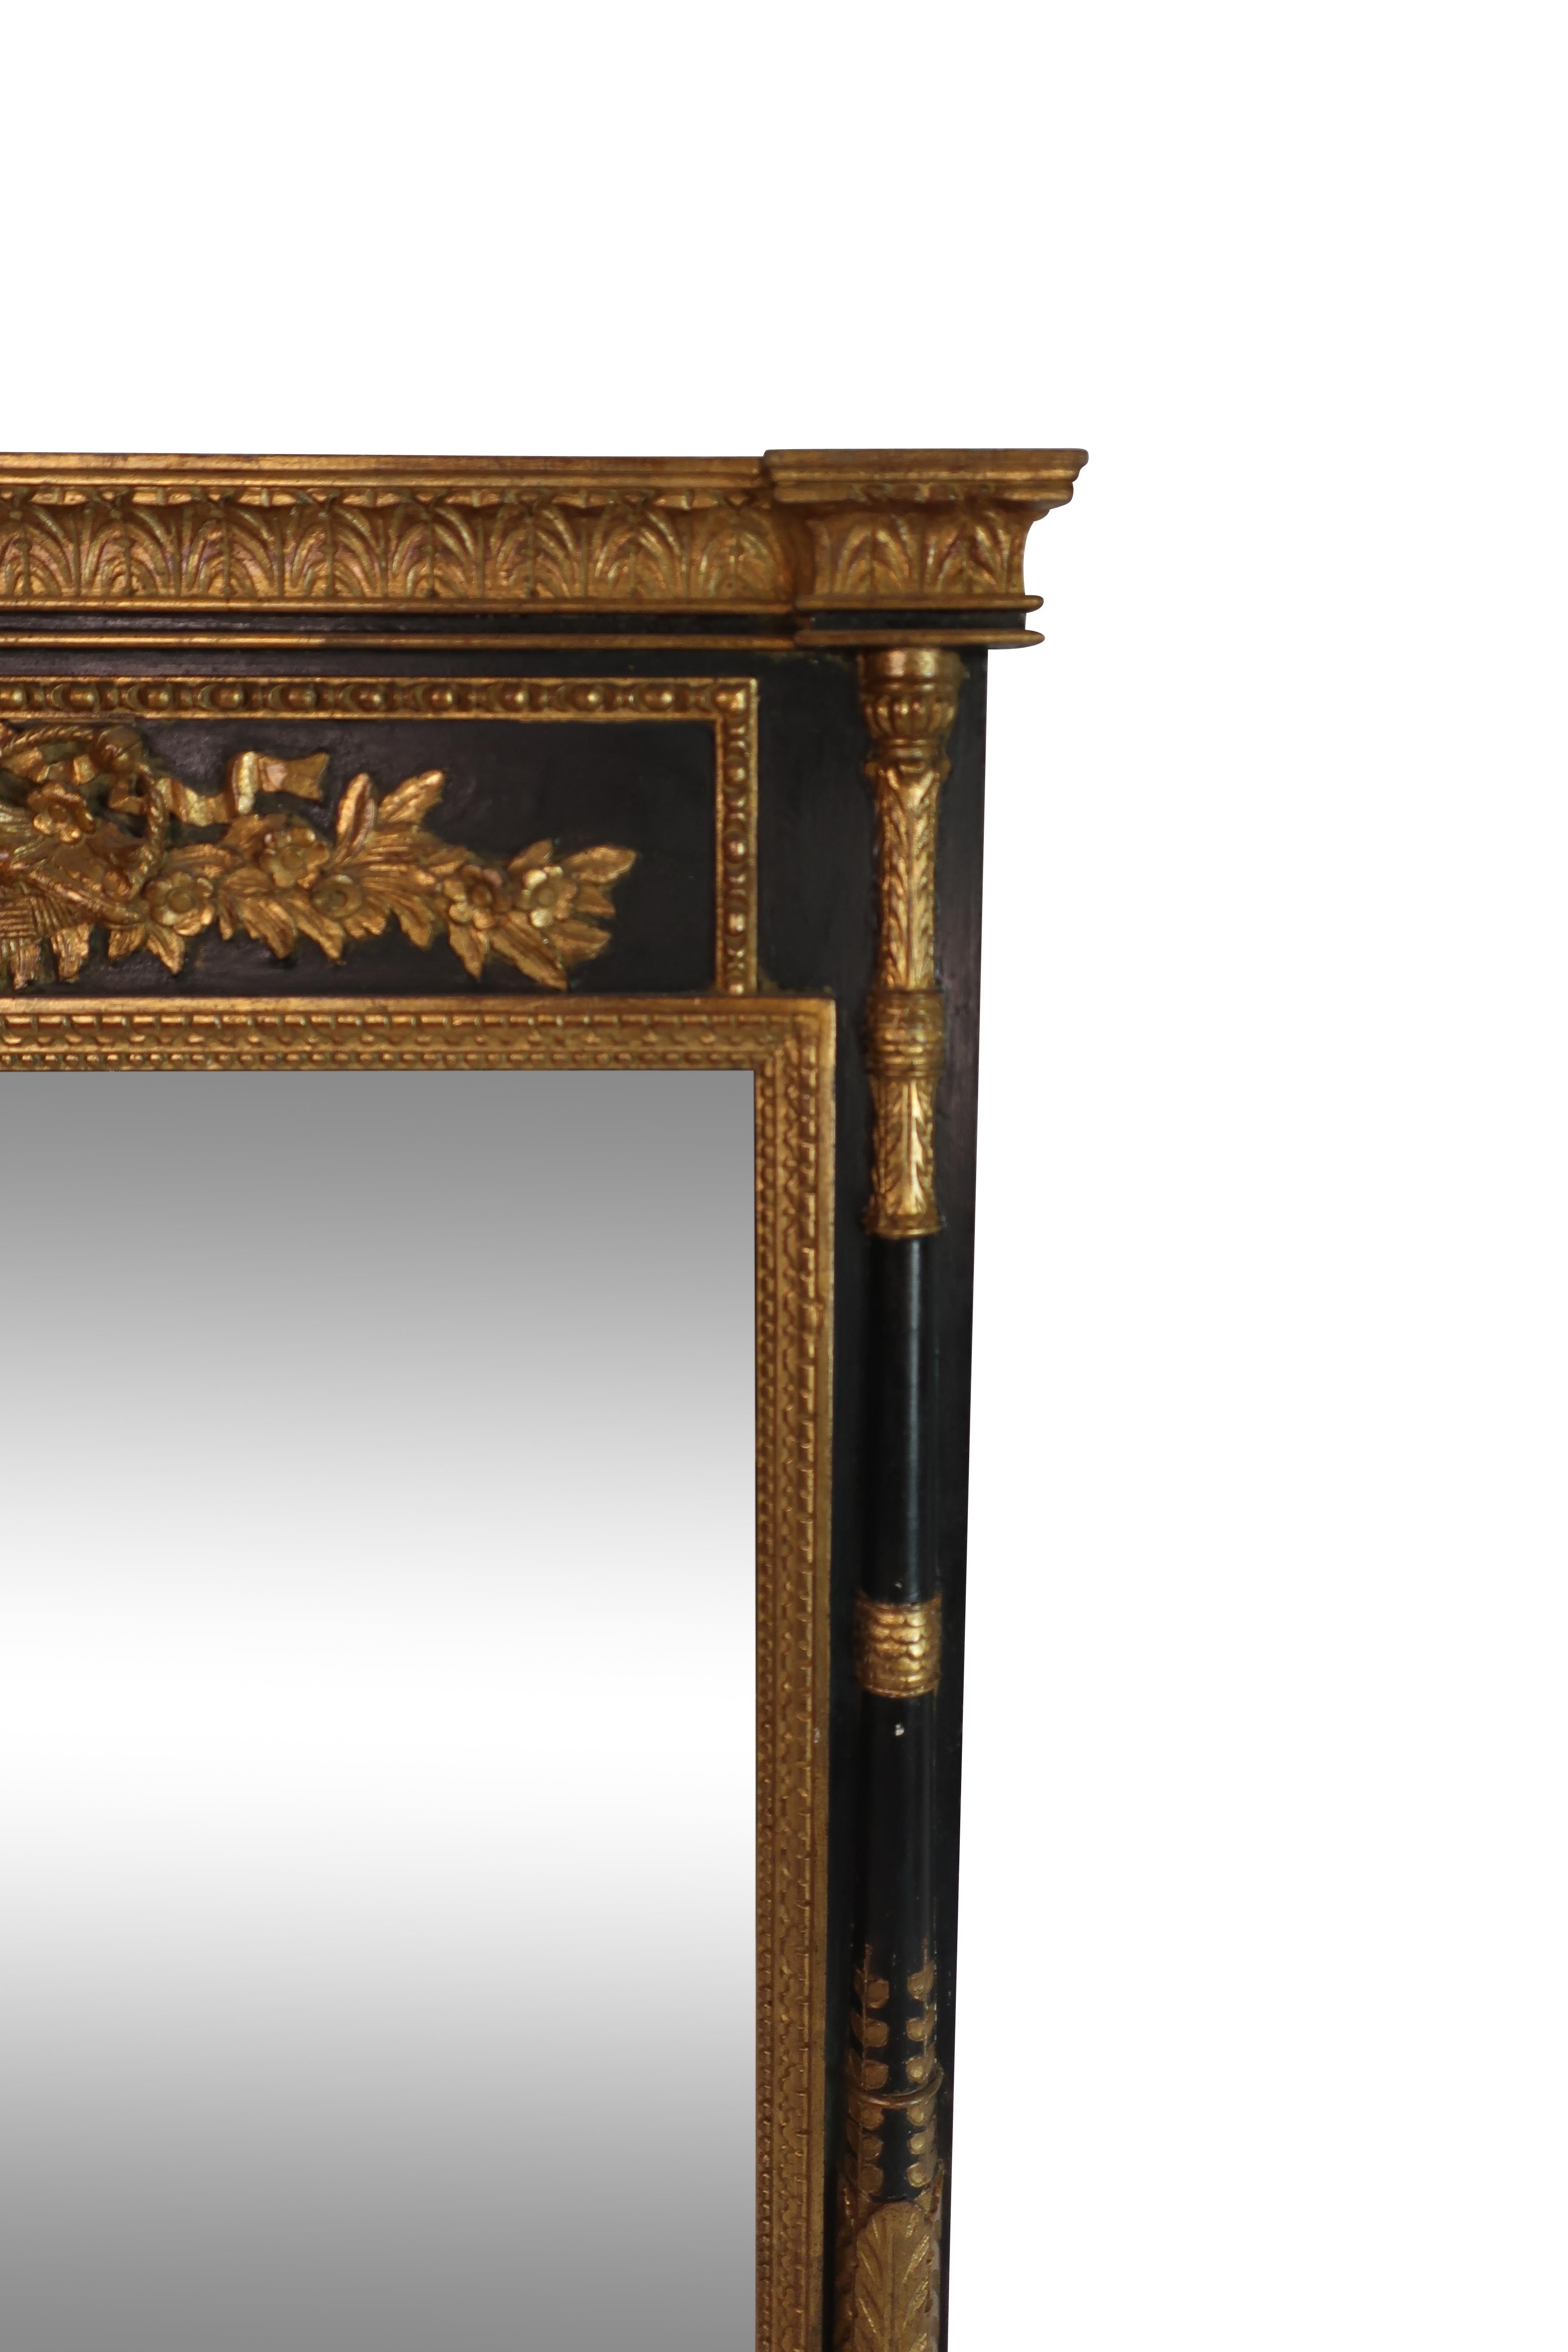 Mid-20th Century Neoclassical Parcel-Gilt Mirror with Finely Carved Giltwood Columns